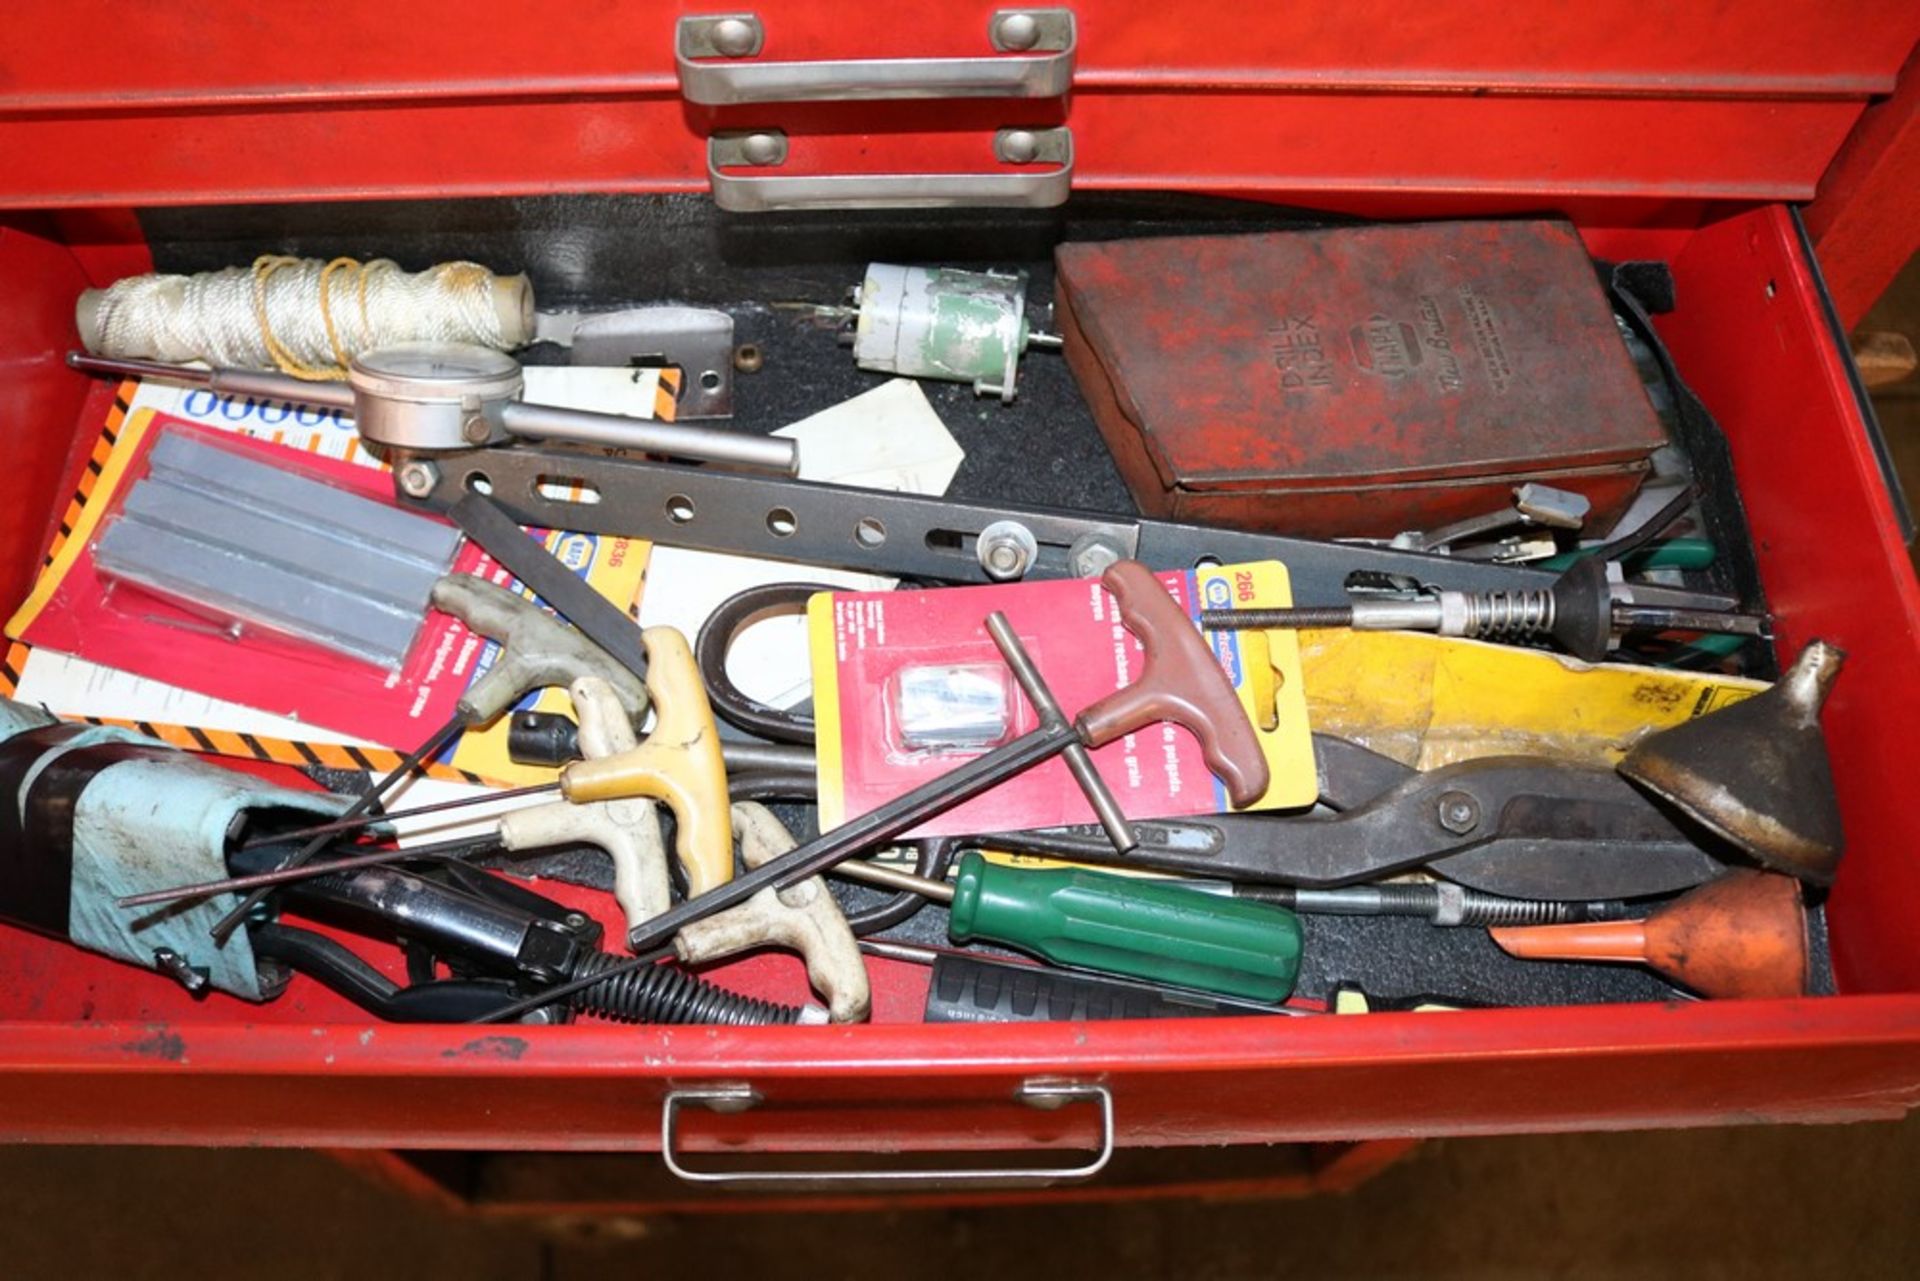 Stackon Rolling Tool Box with Contents "Pnuematic Tools, Tooling, Handtools and Others" - Image 5 of 8